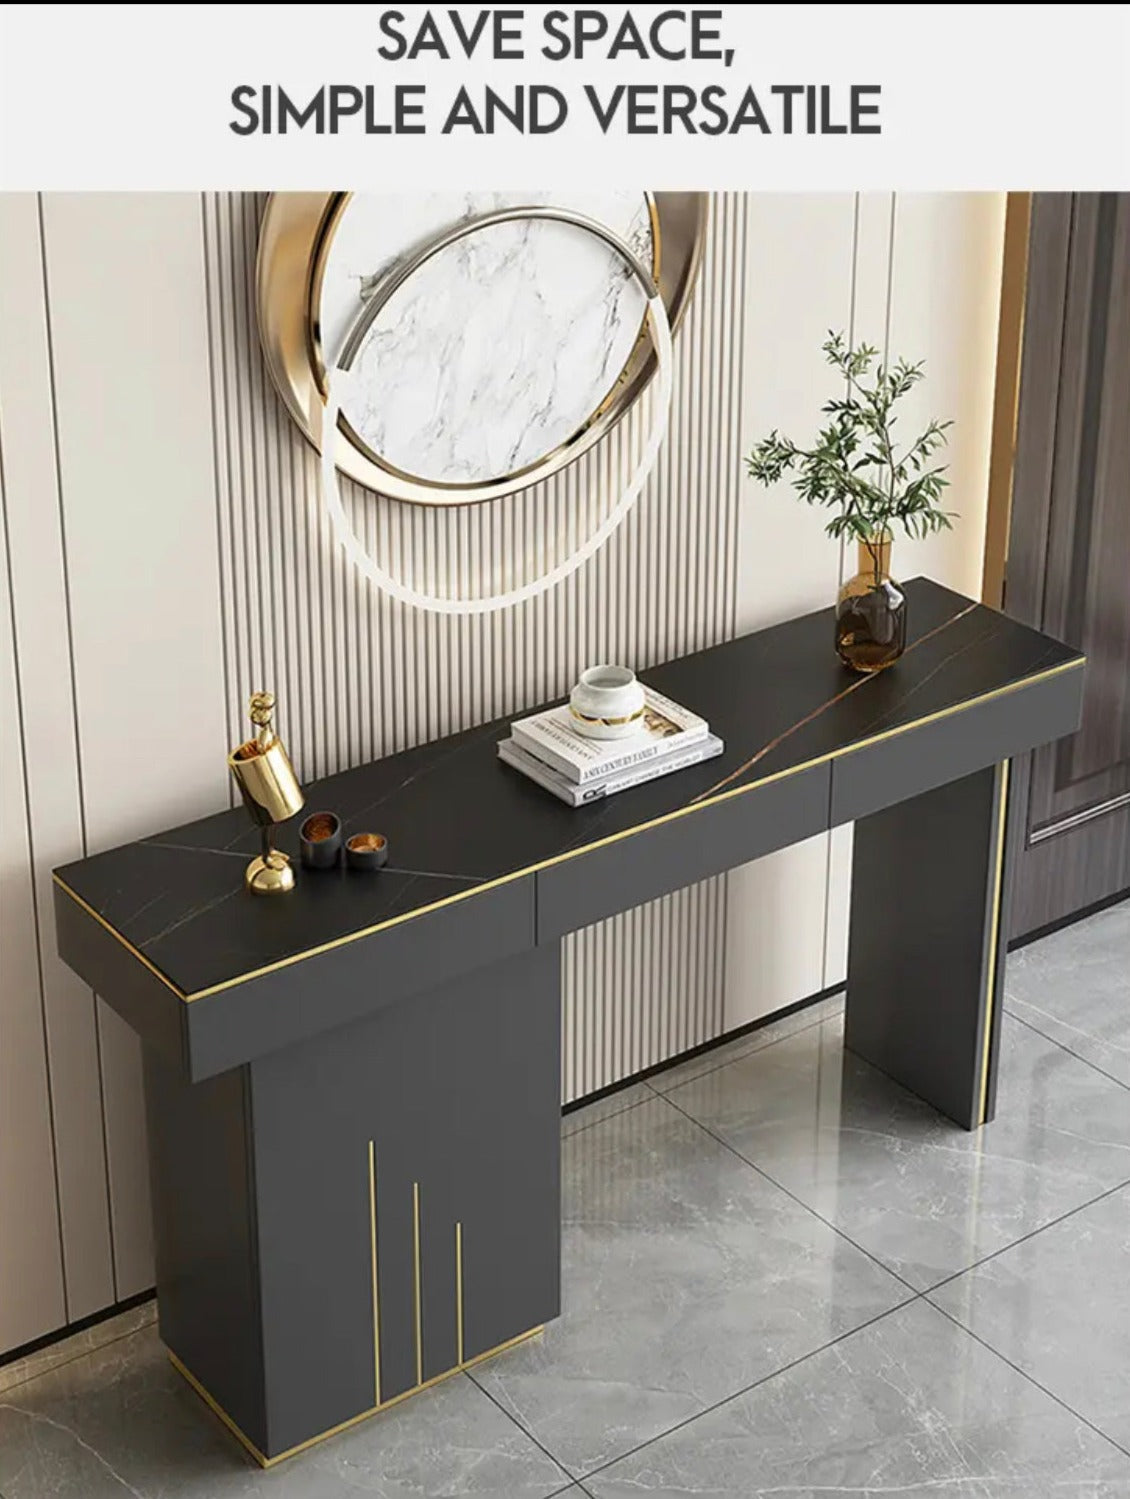 Consoles Wall Table Living Room Furniture Simple Modern Nordic Design Black Gold Porch 